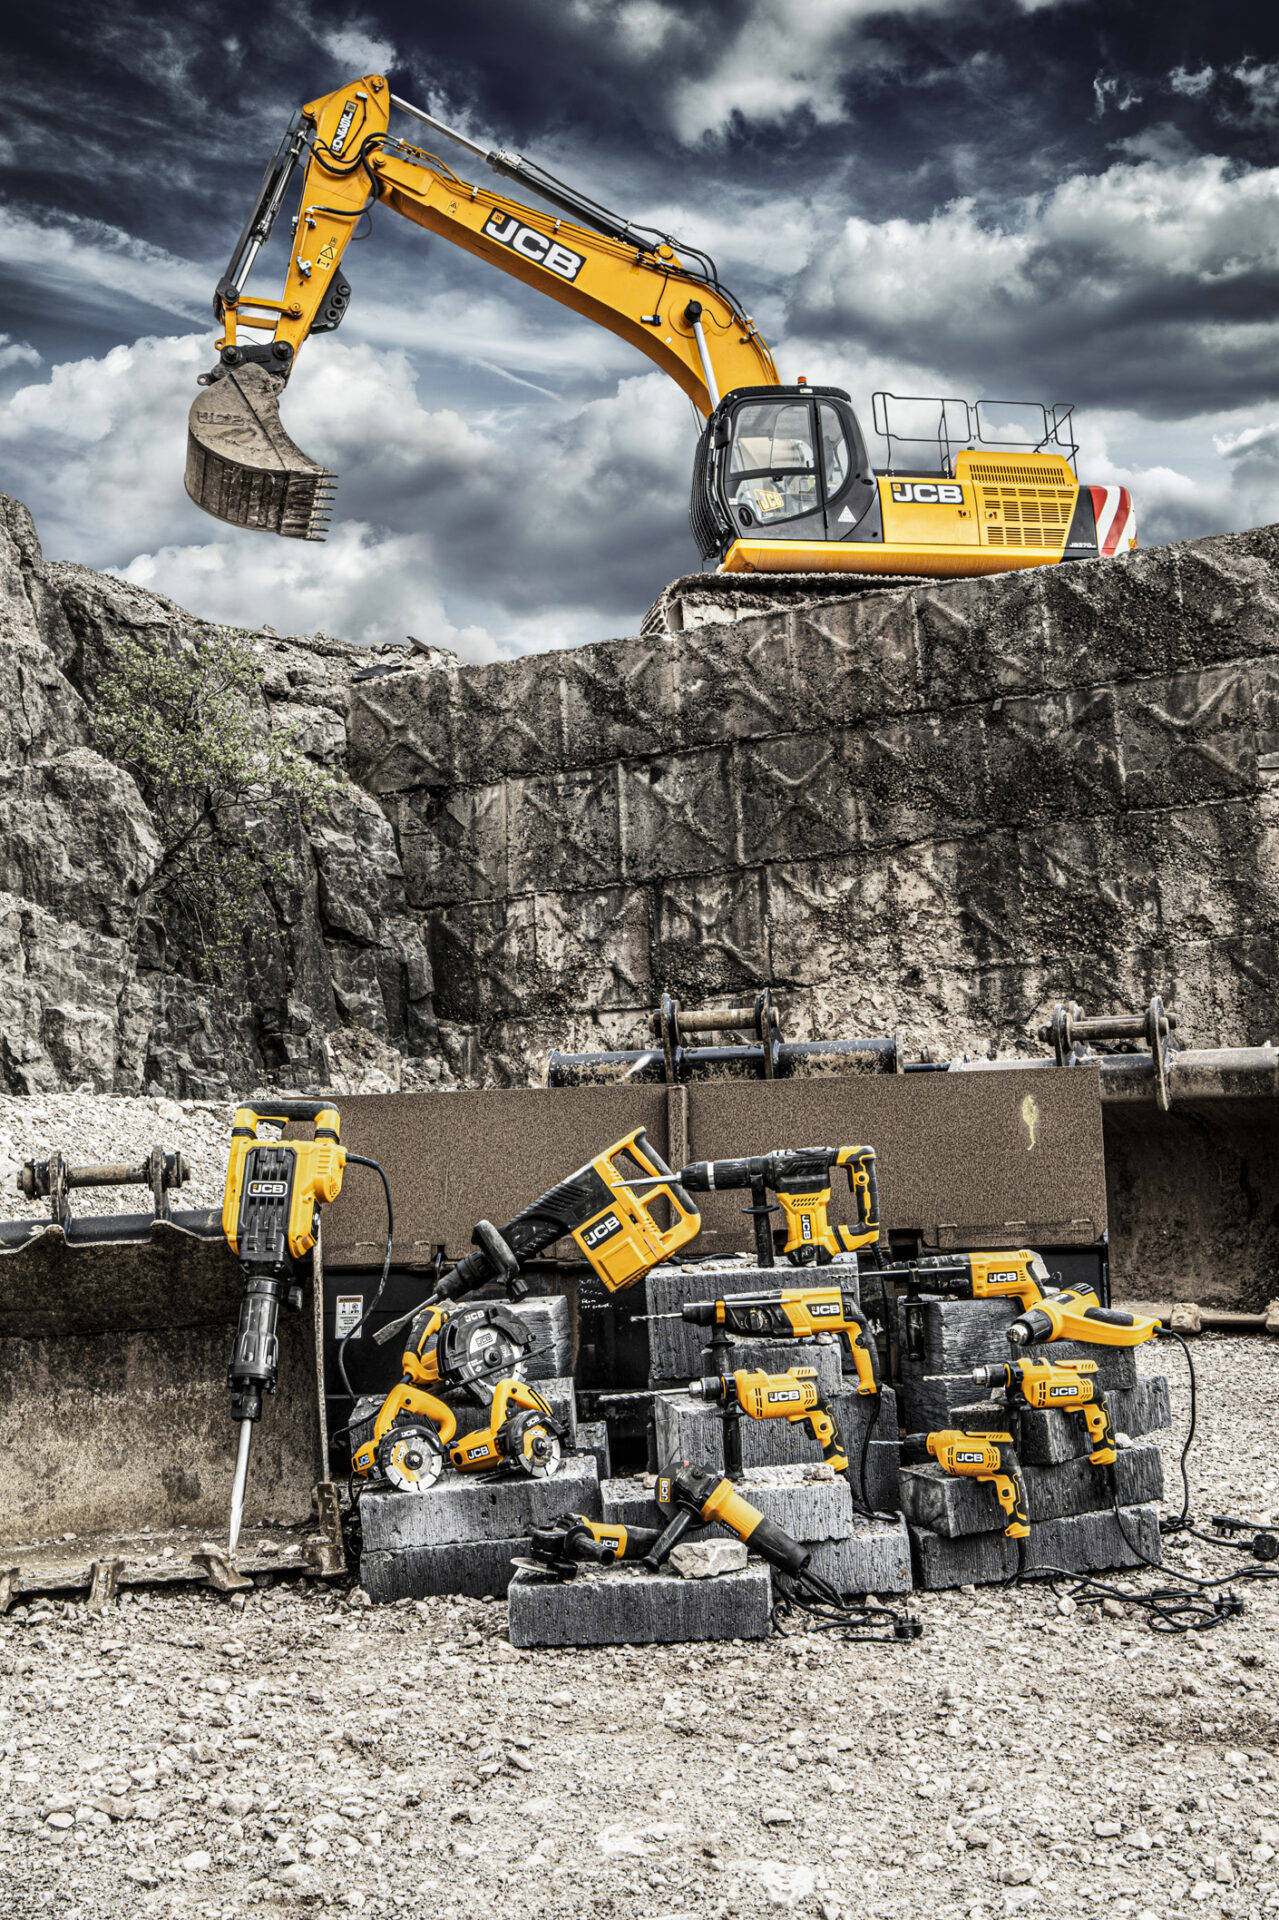 commercial-and-advertising-product-photography-for-jcb-tools